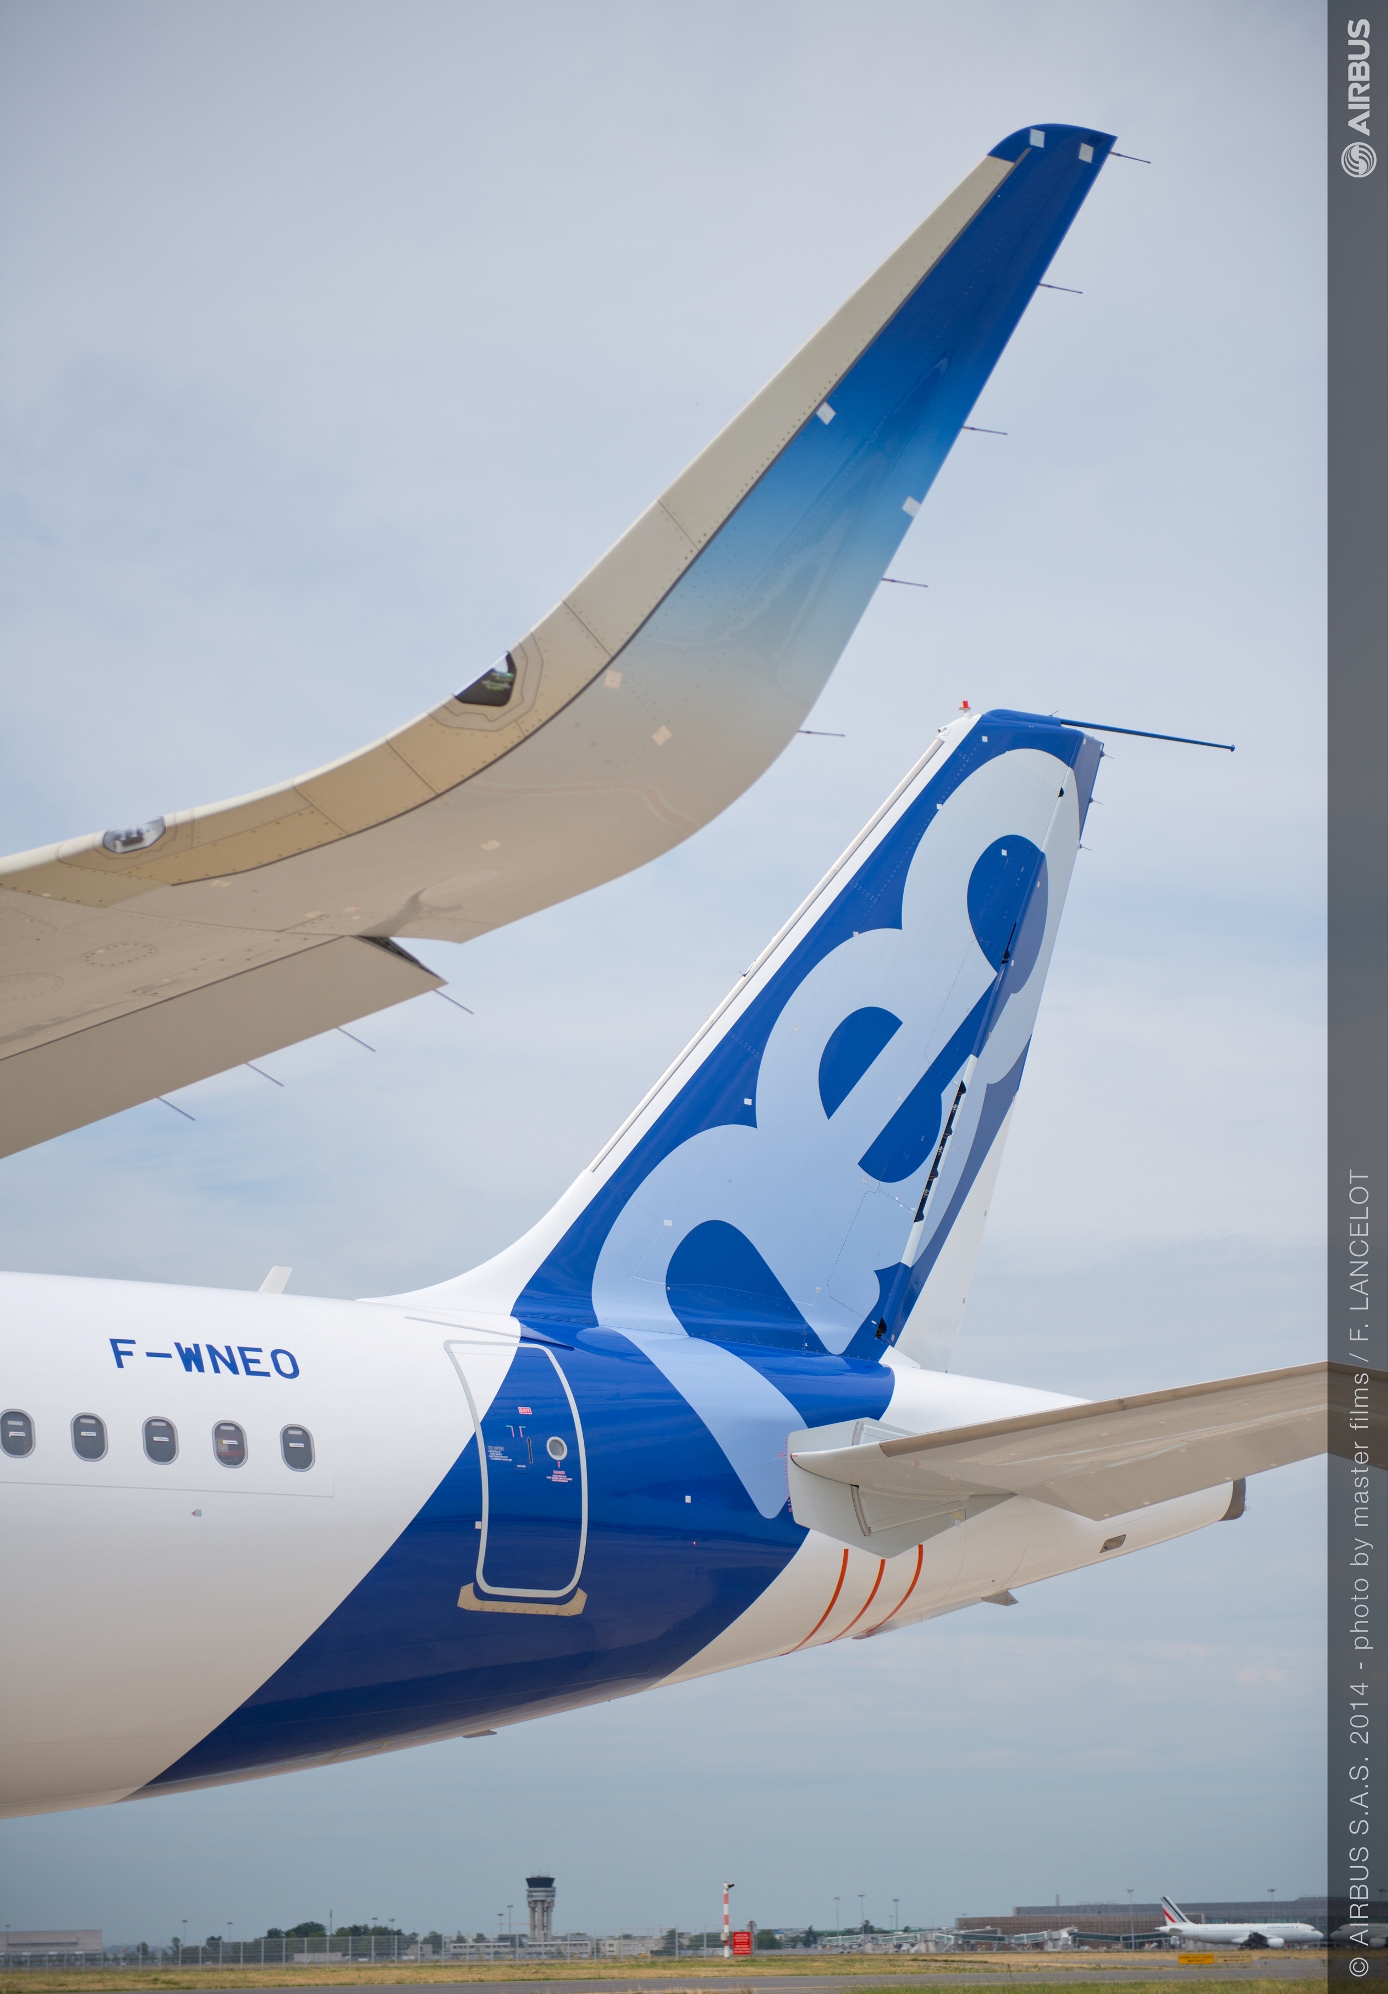 Facts you need to know about Airbus A320